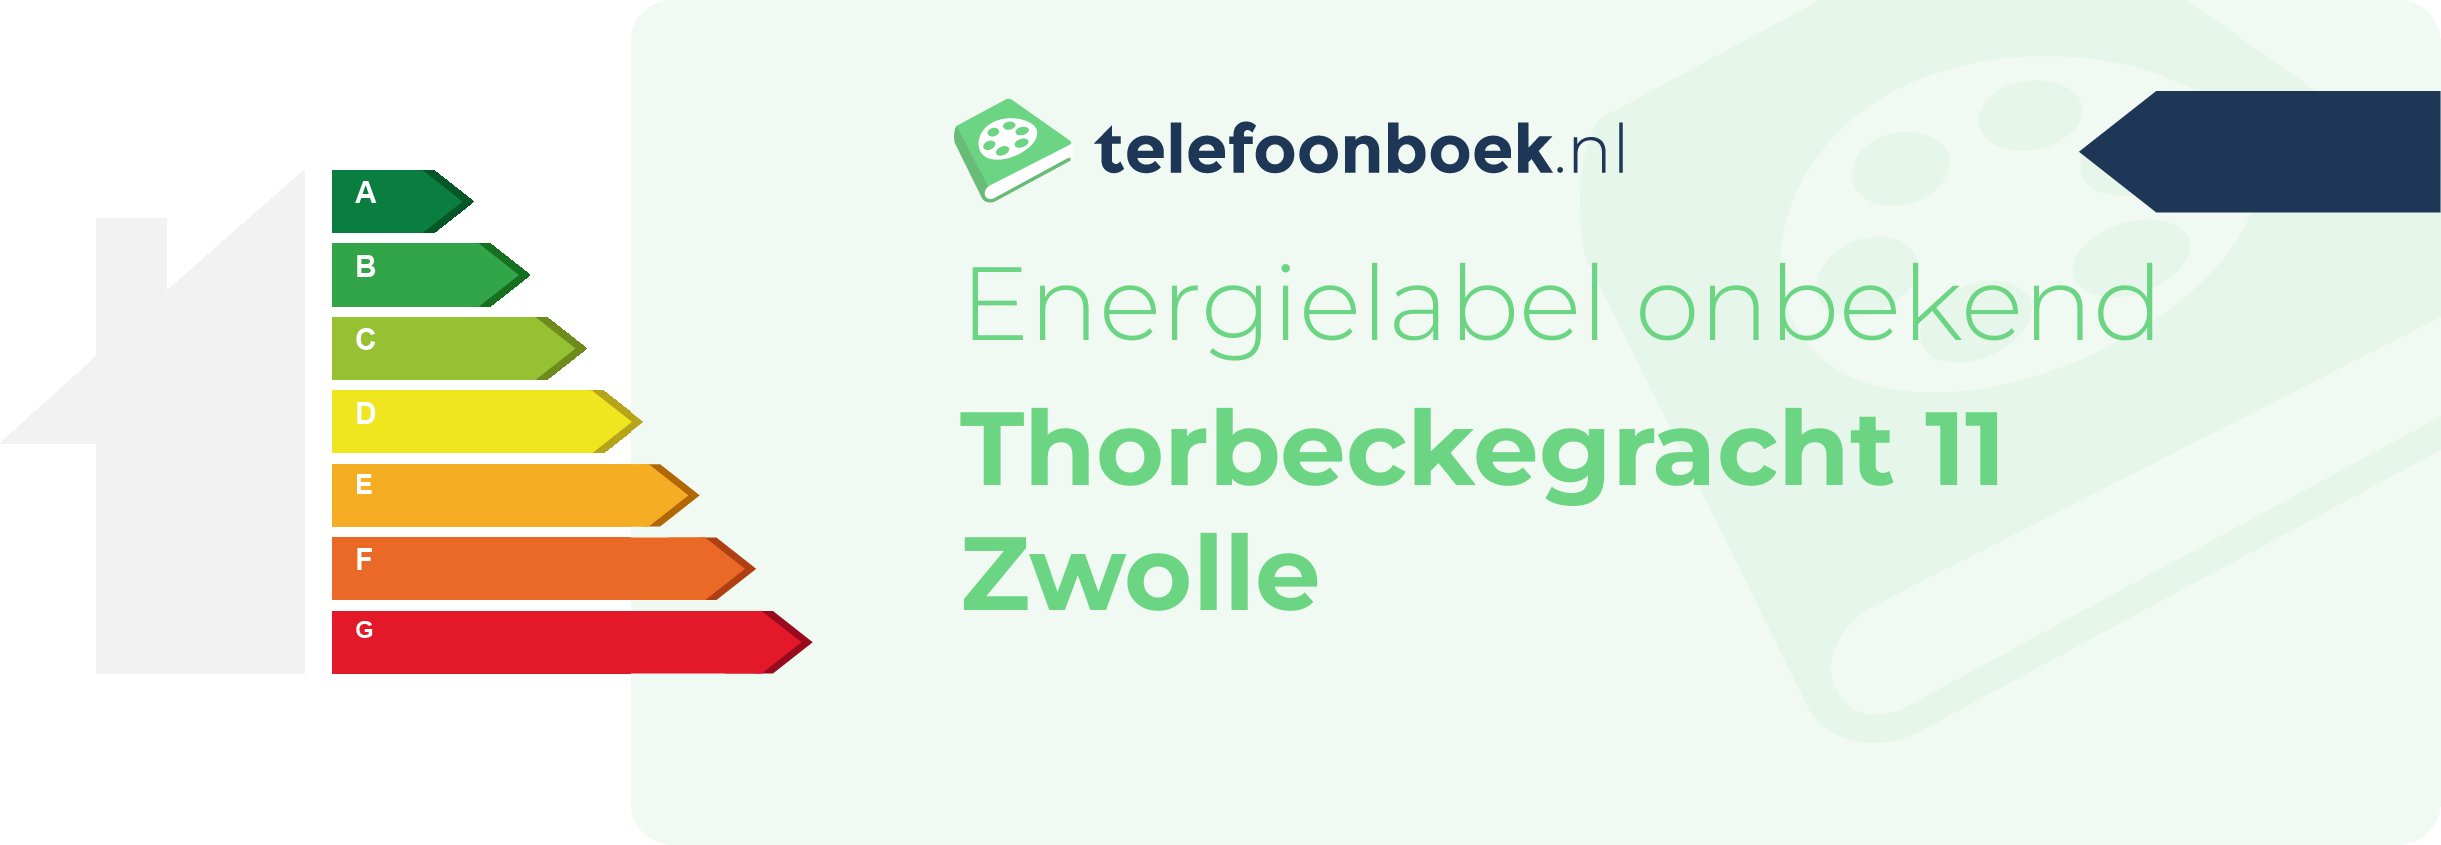 Energielabel Thorbeckegracht 11 Zwolle